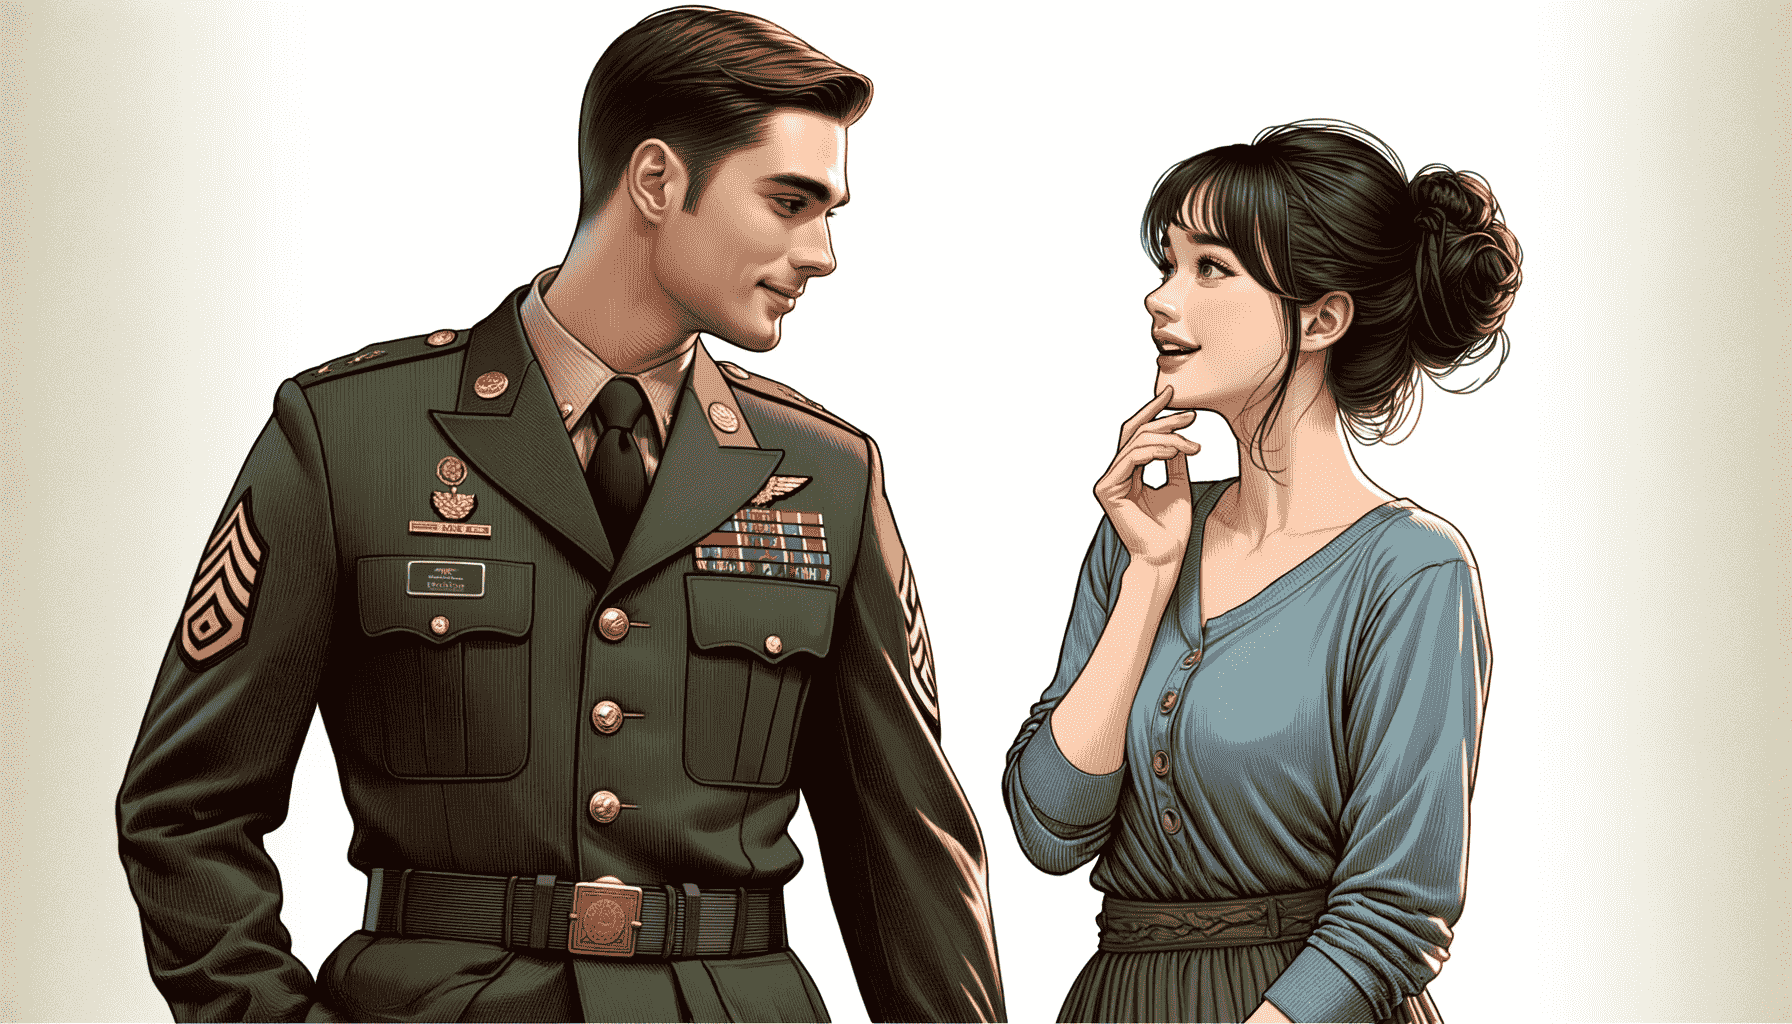 Military man talking to a lady